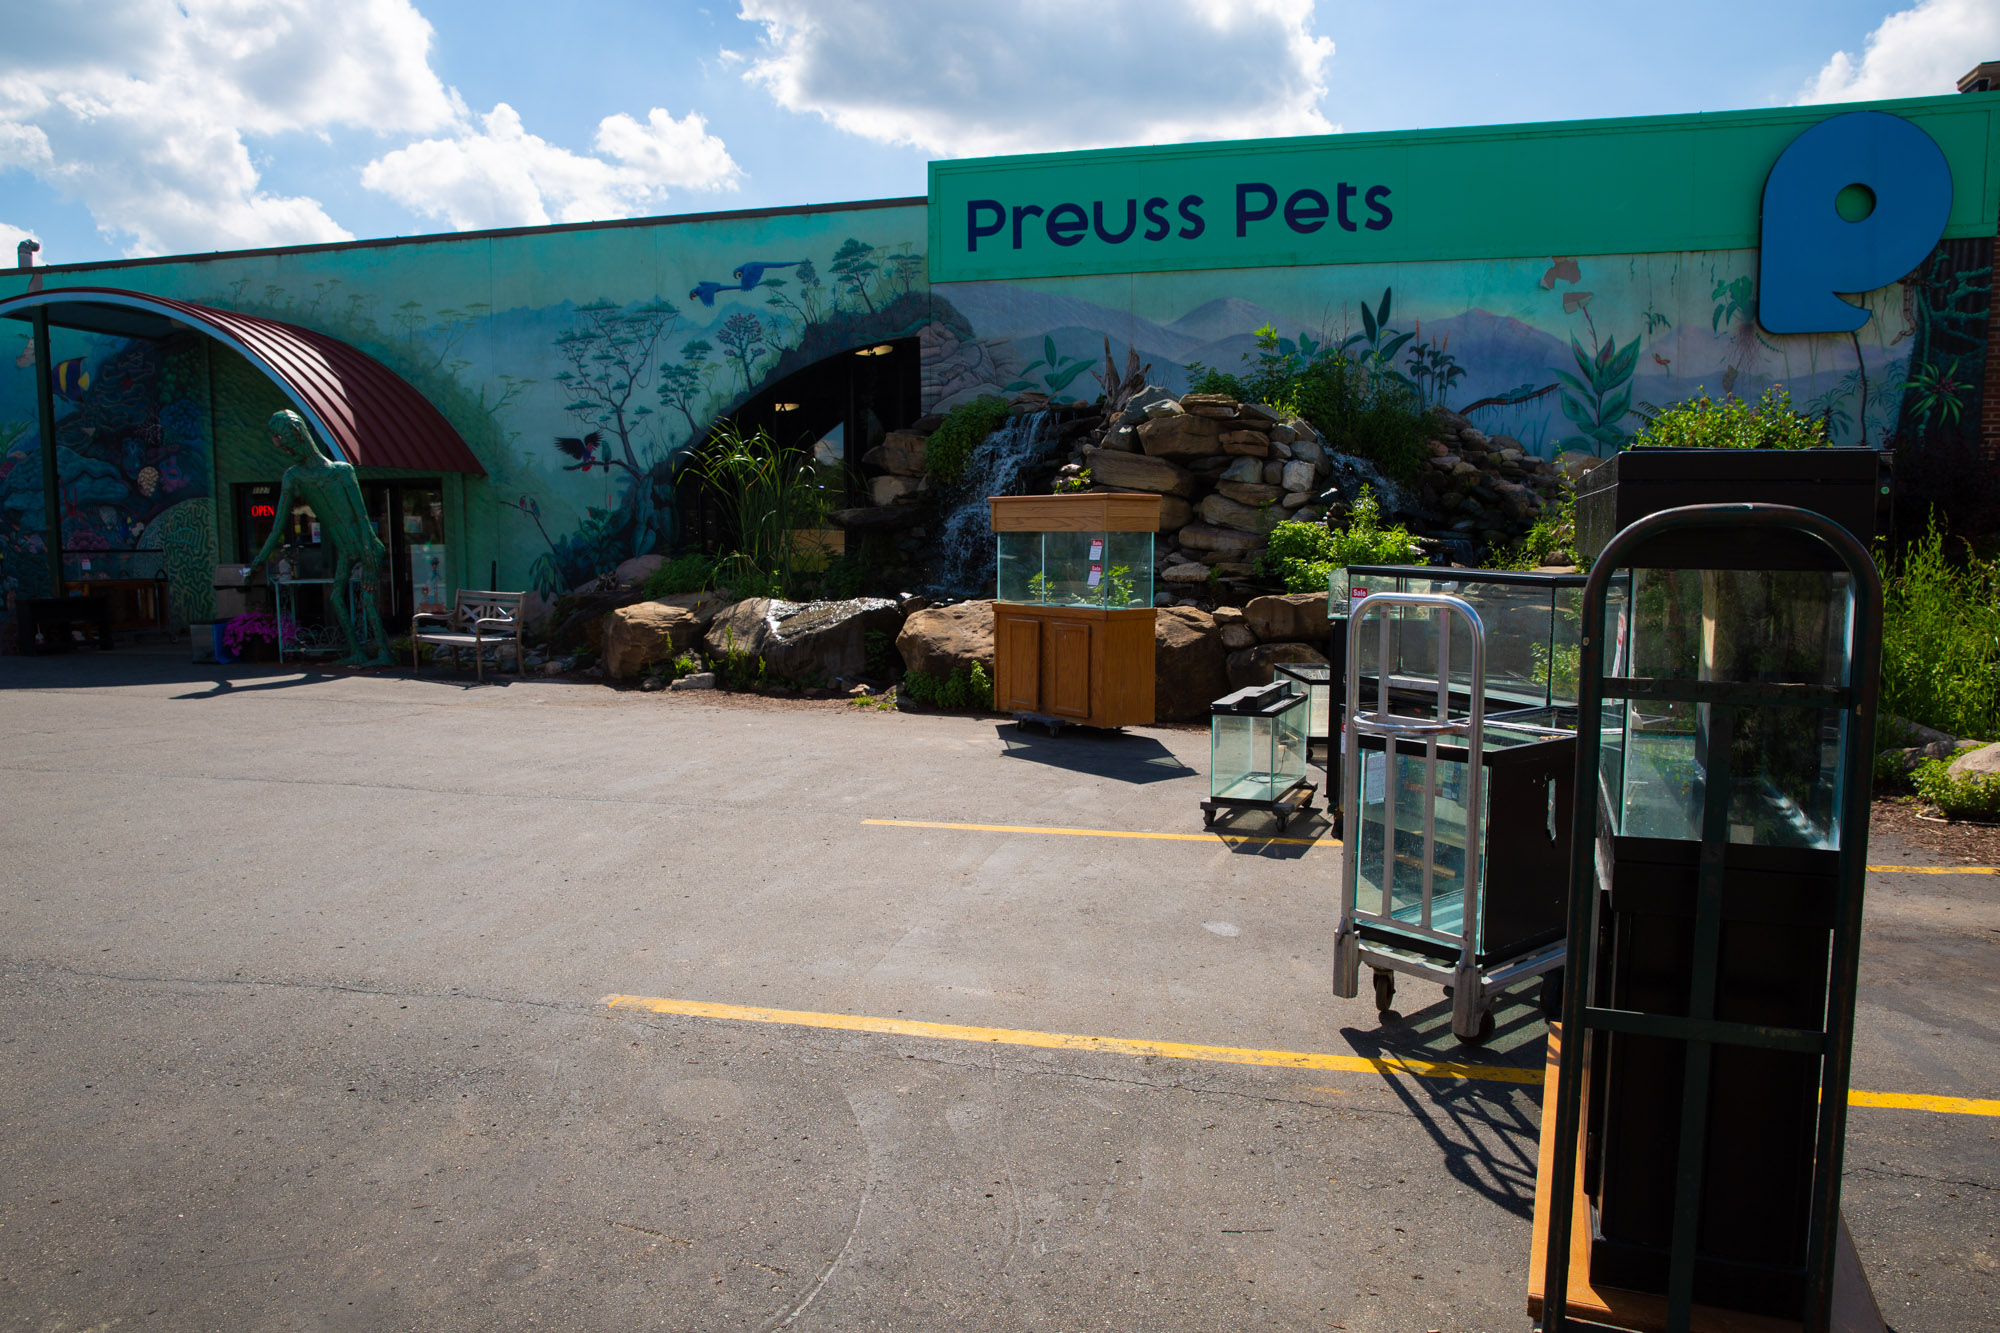 How one pet shop became a fish sanctuary after an ice storm News21